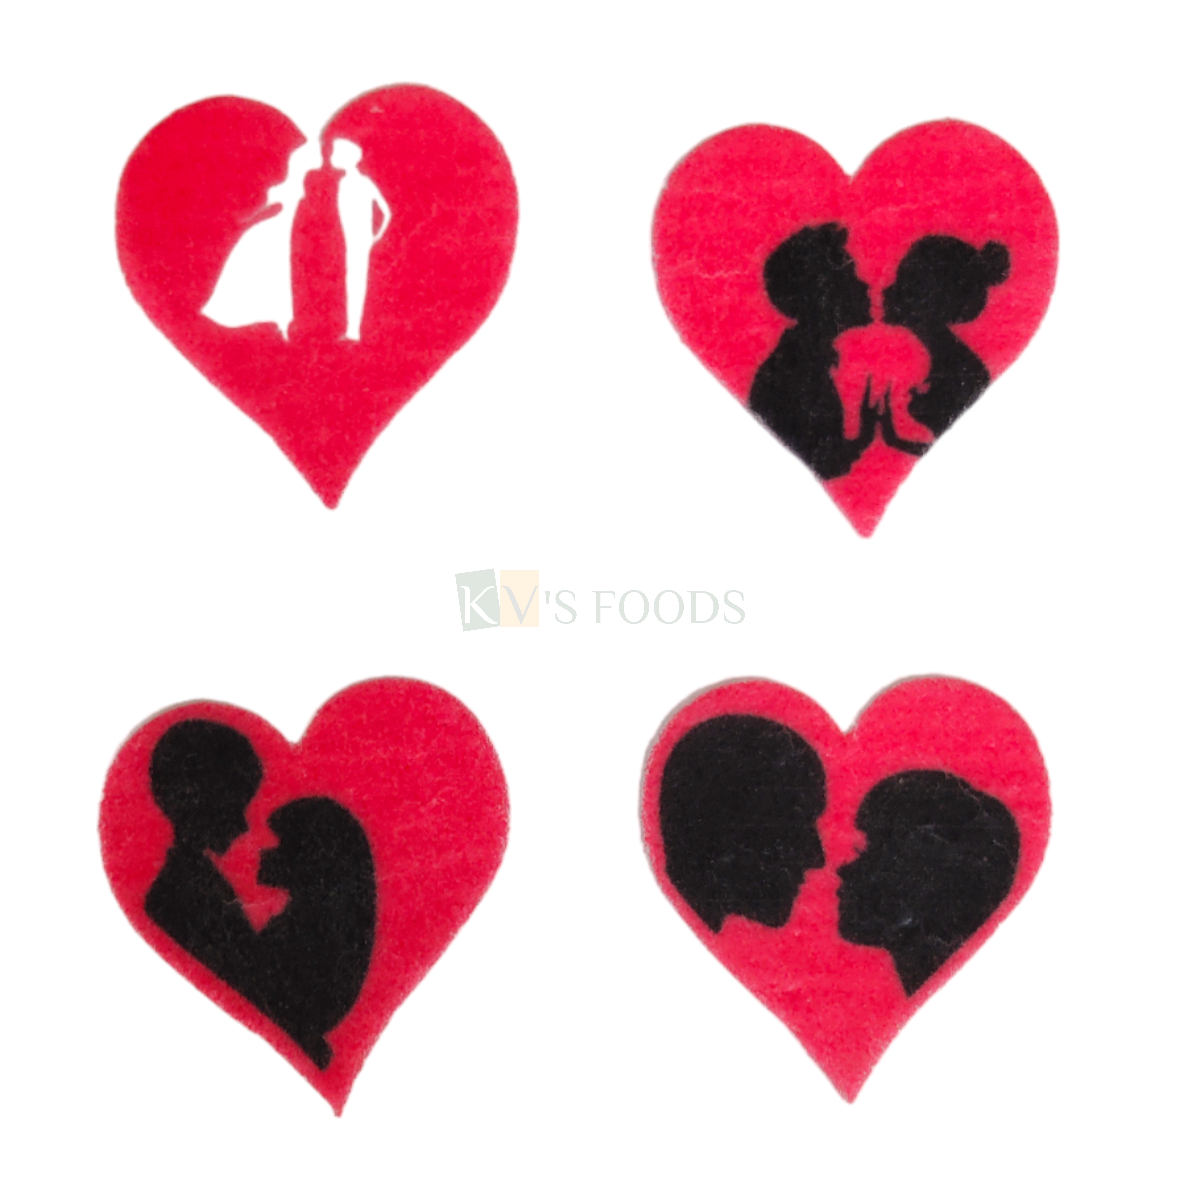 35 PCs Red Colour Hearts Shape With Couple Faces Mix Design Pre-Cut Pre-Printed Edible Wafer Paper Cutouts Bride Groom Kissing Decor Stick-on Cake Decor Wedding Anniversary Cake Topper Set